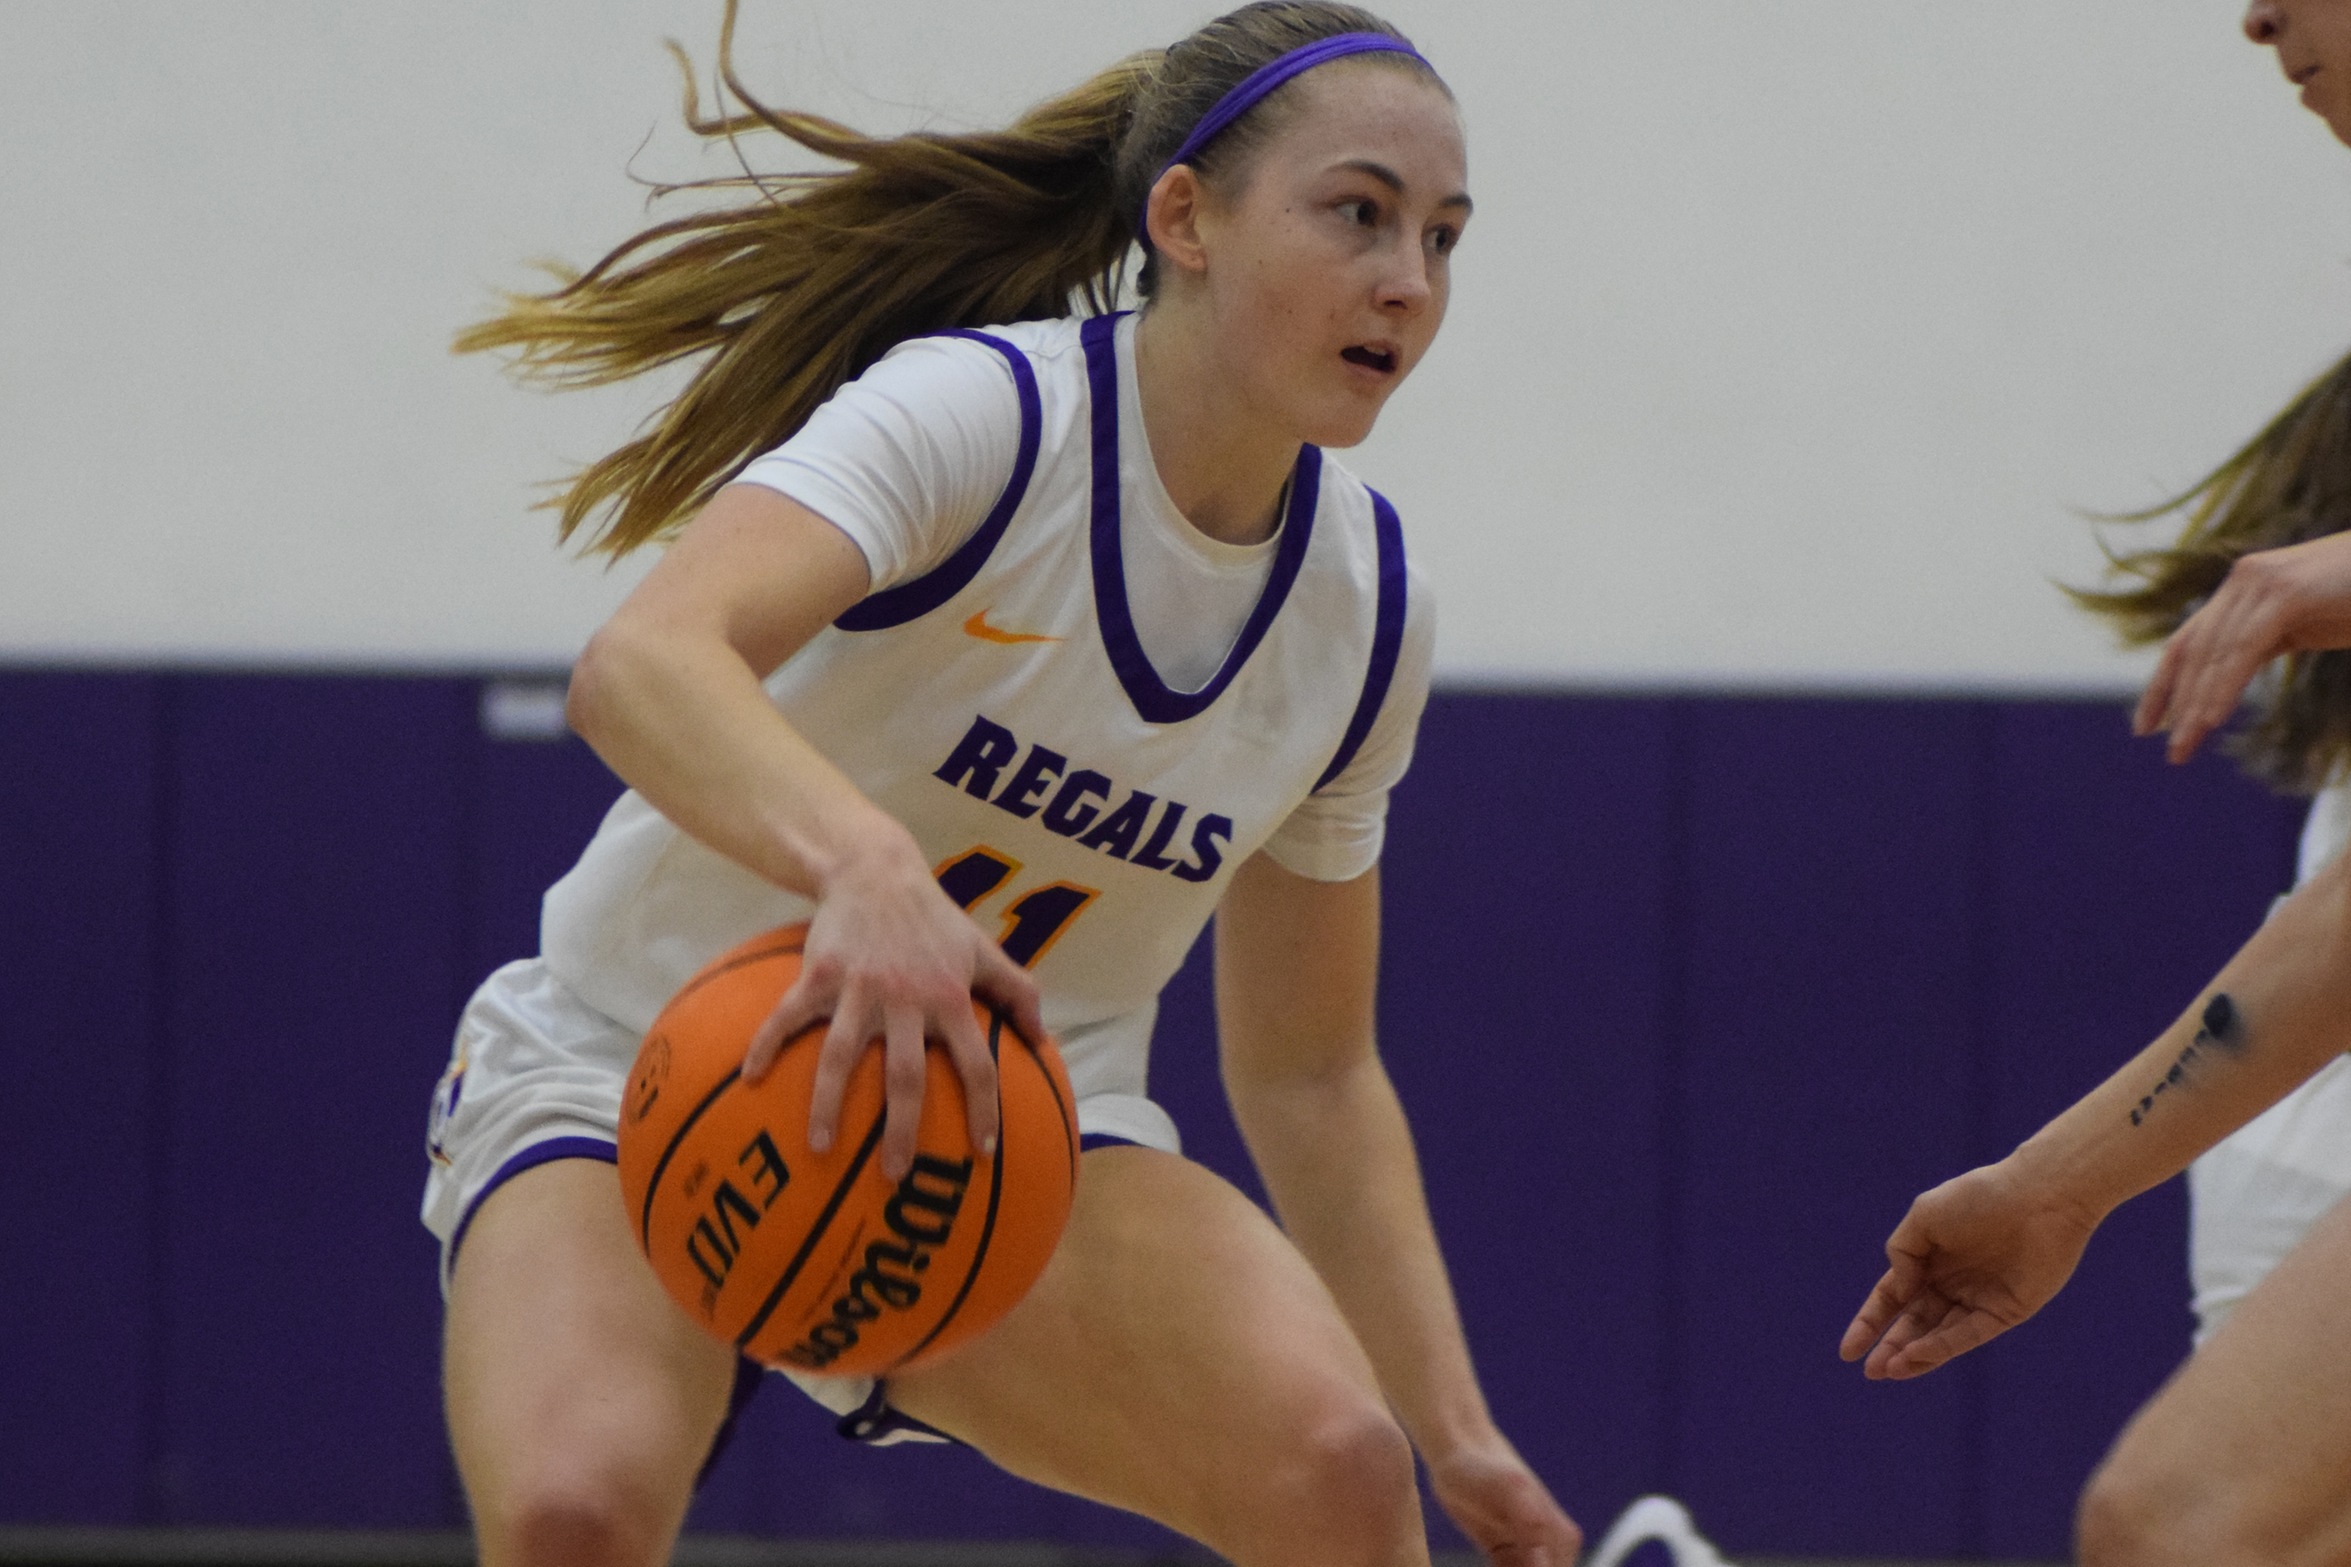 Regals Send Whittier Home With Loss; Morgan Puts Up 24 Points